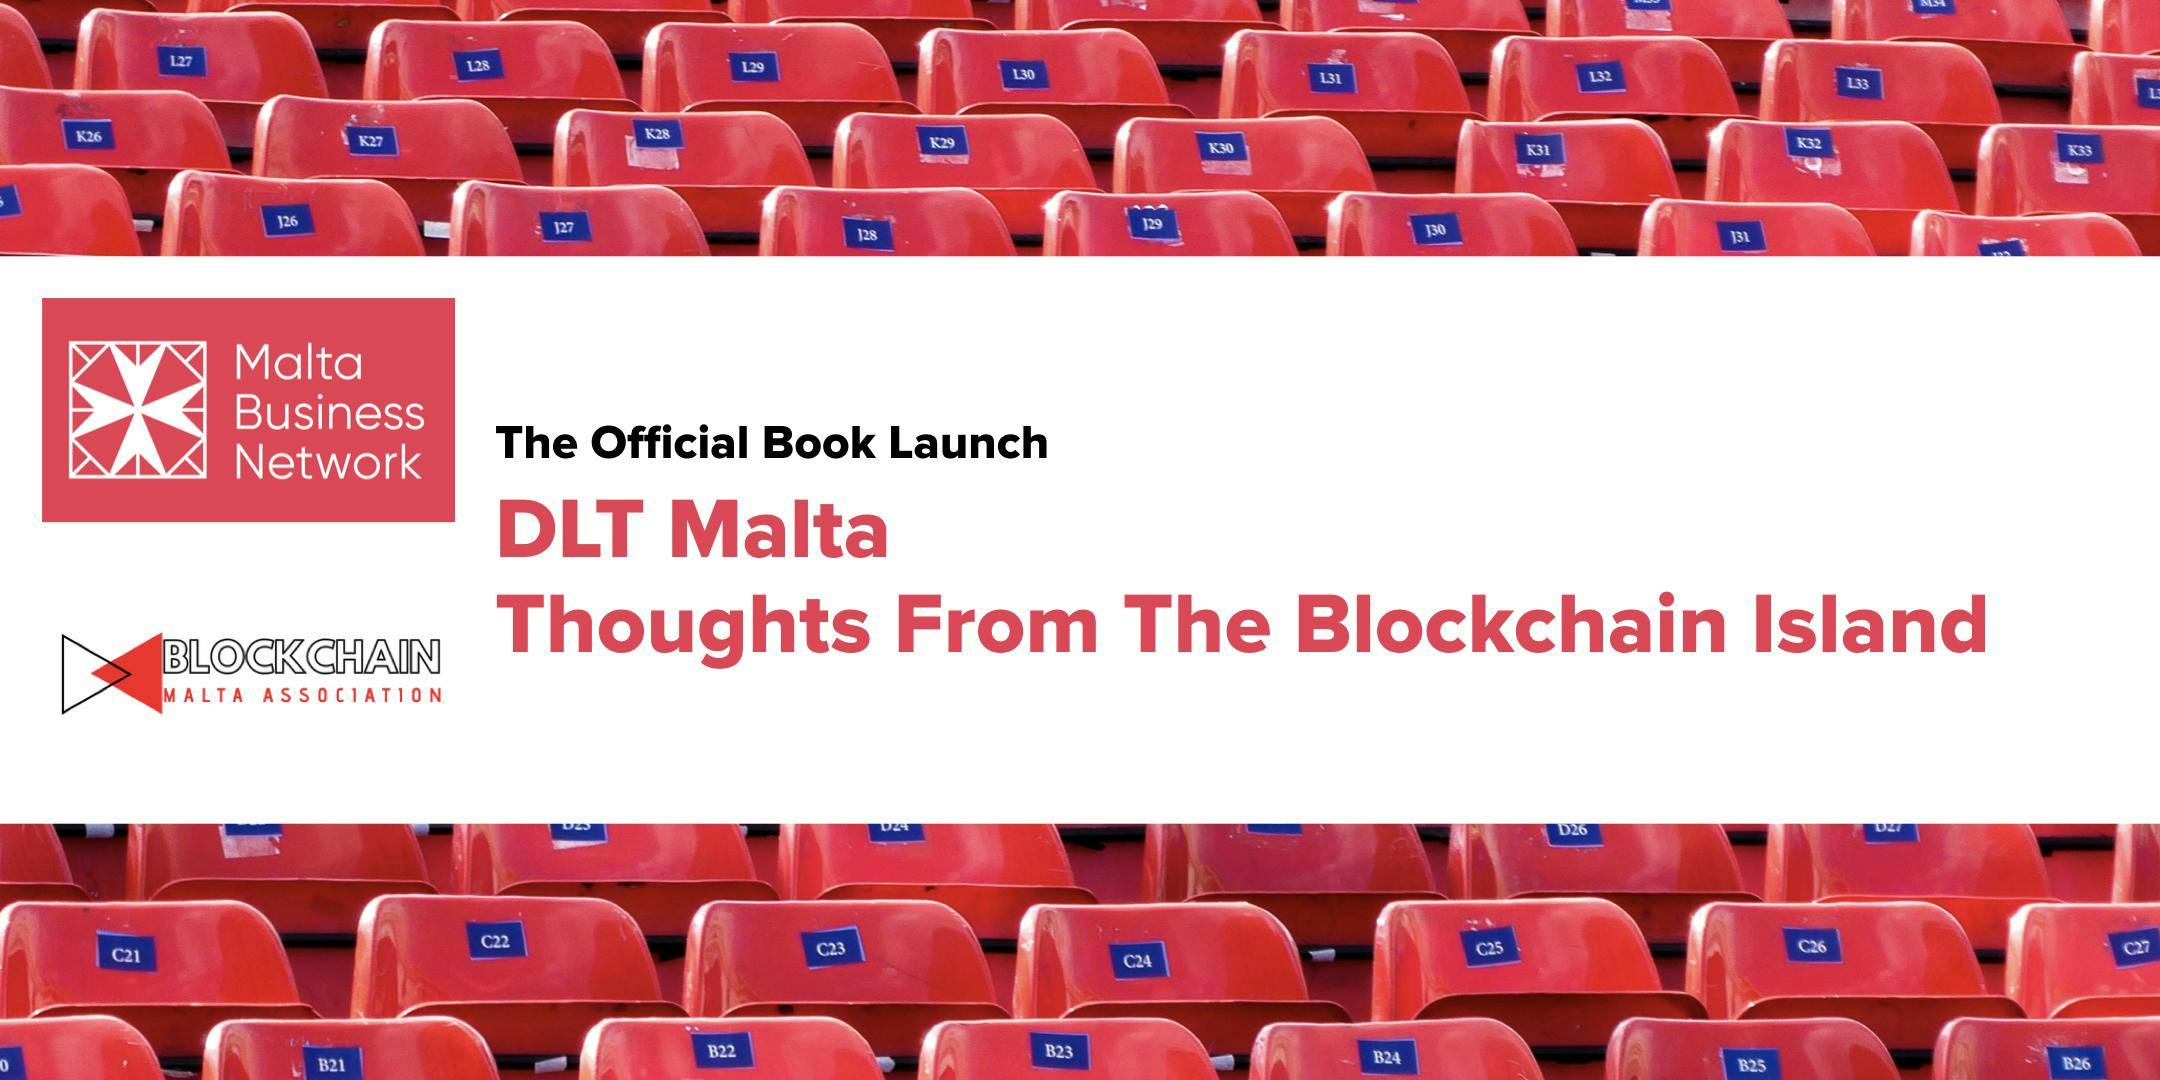 DLT Malta - Thoughts From The Blockchain Island, MBN May 2019